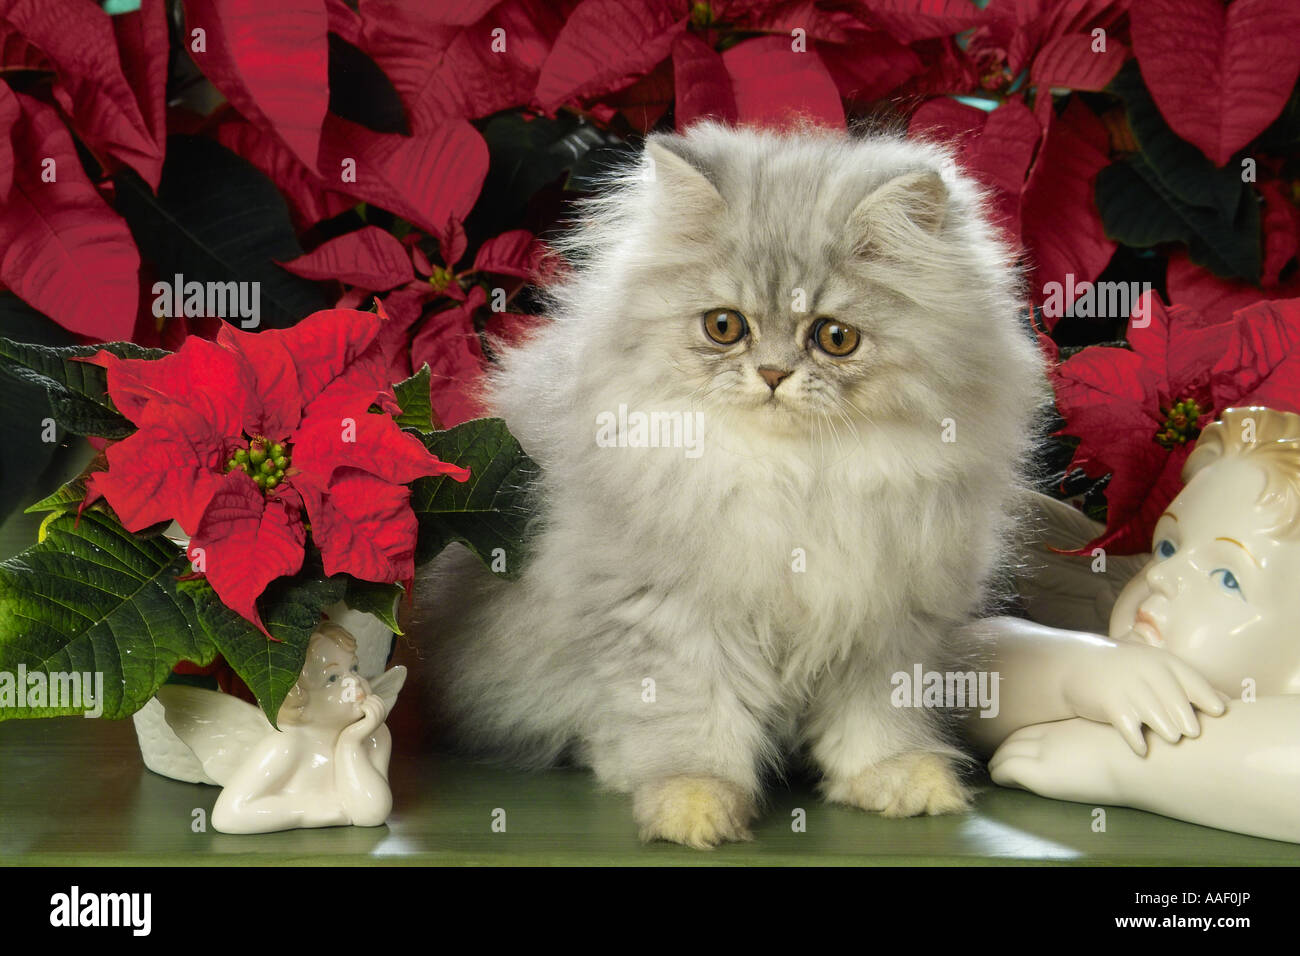 Persian kitten in front of flowers Stock Photo